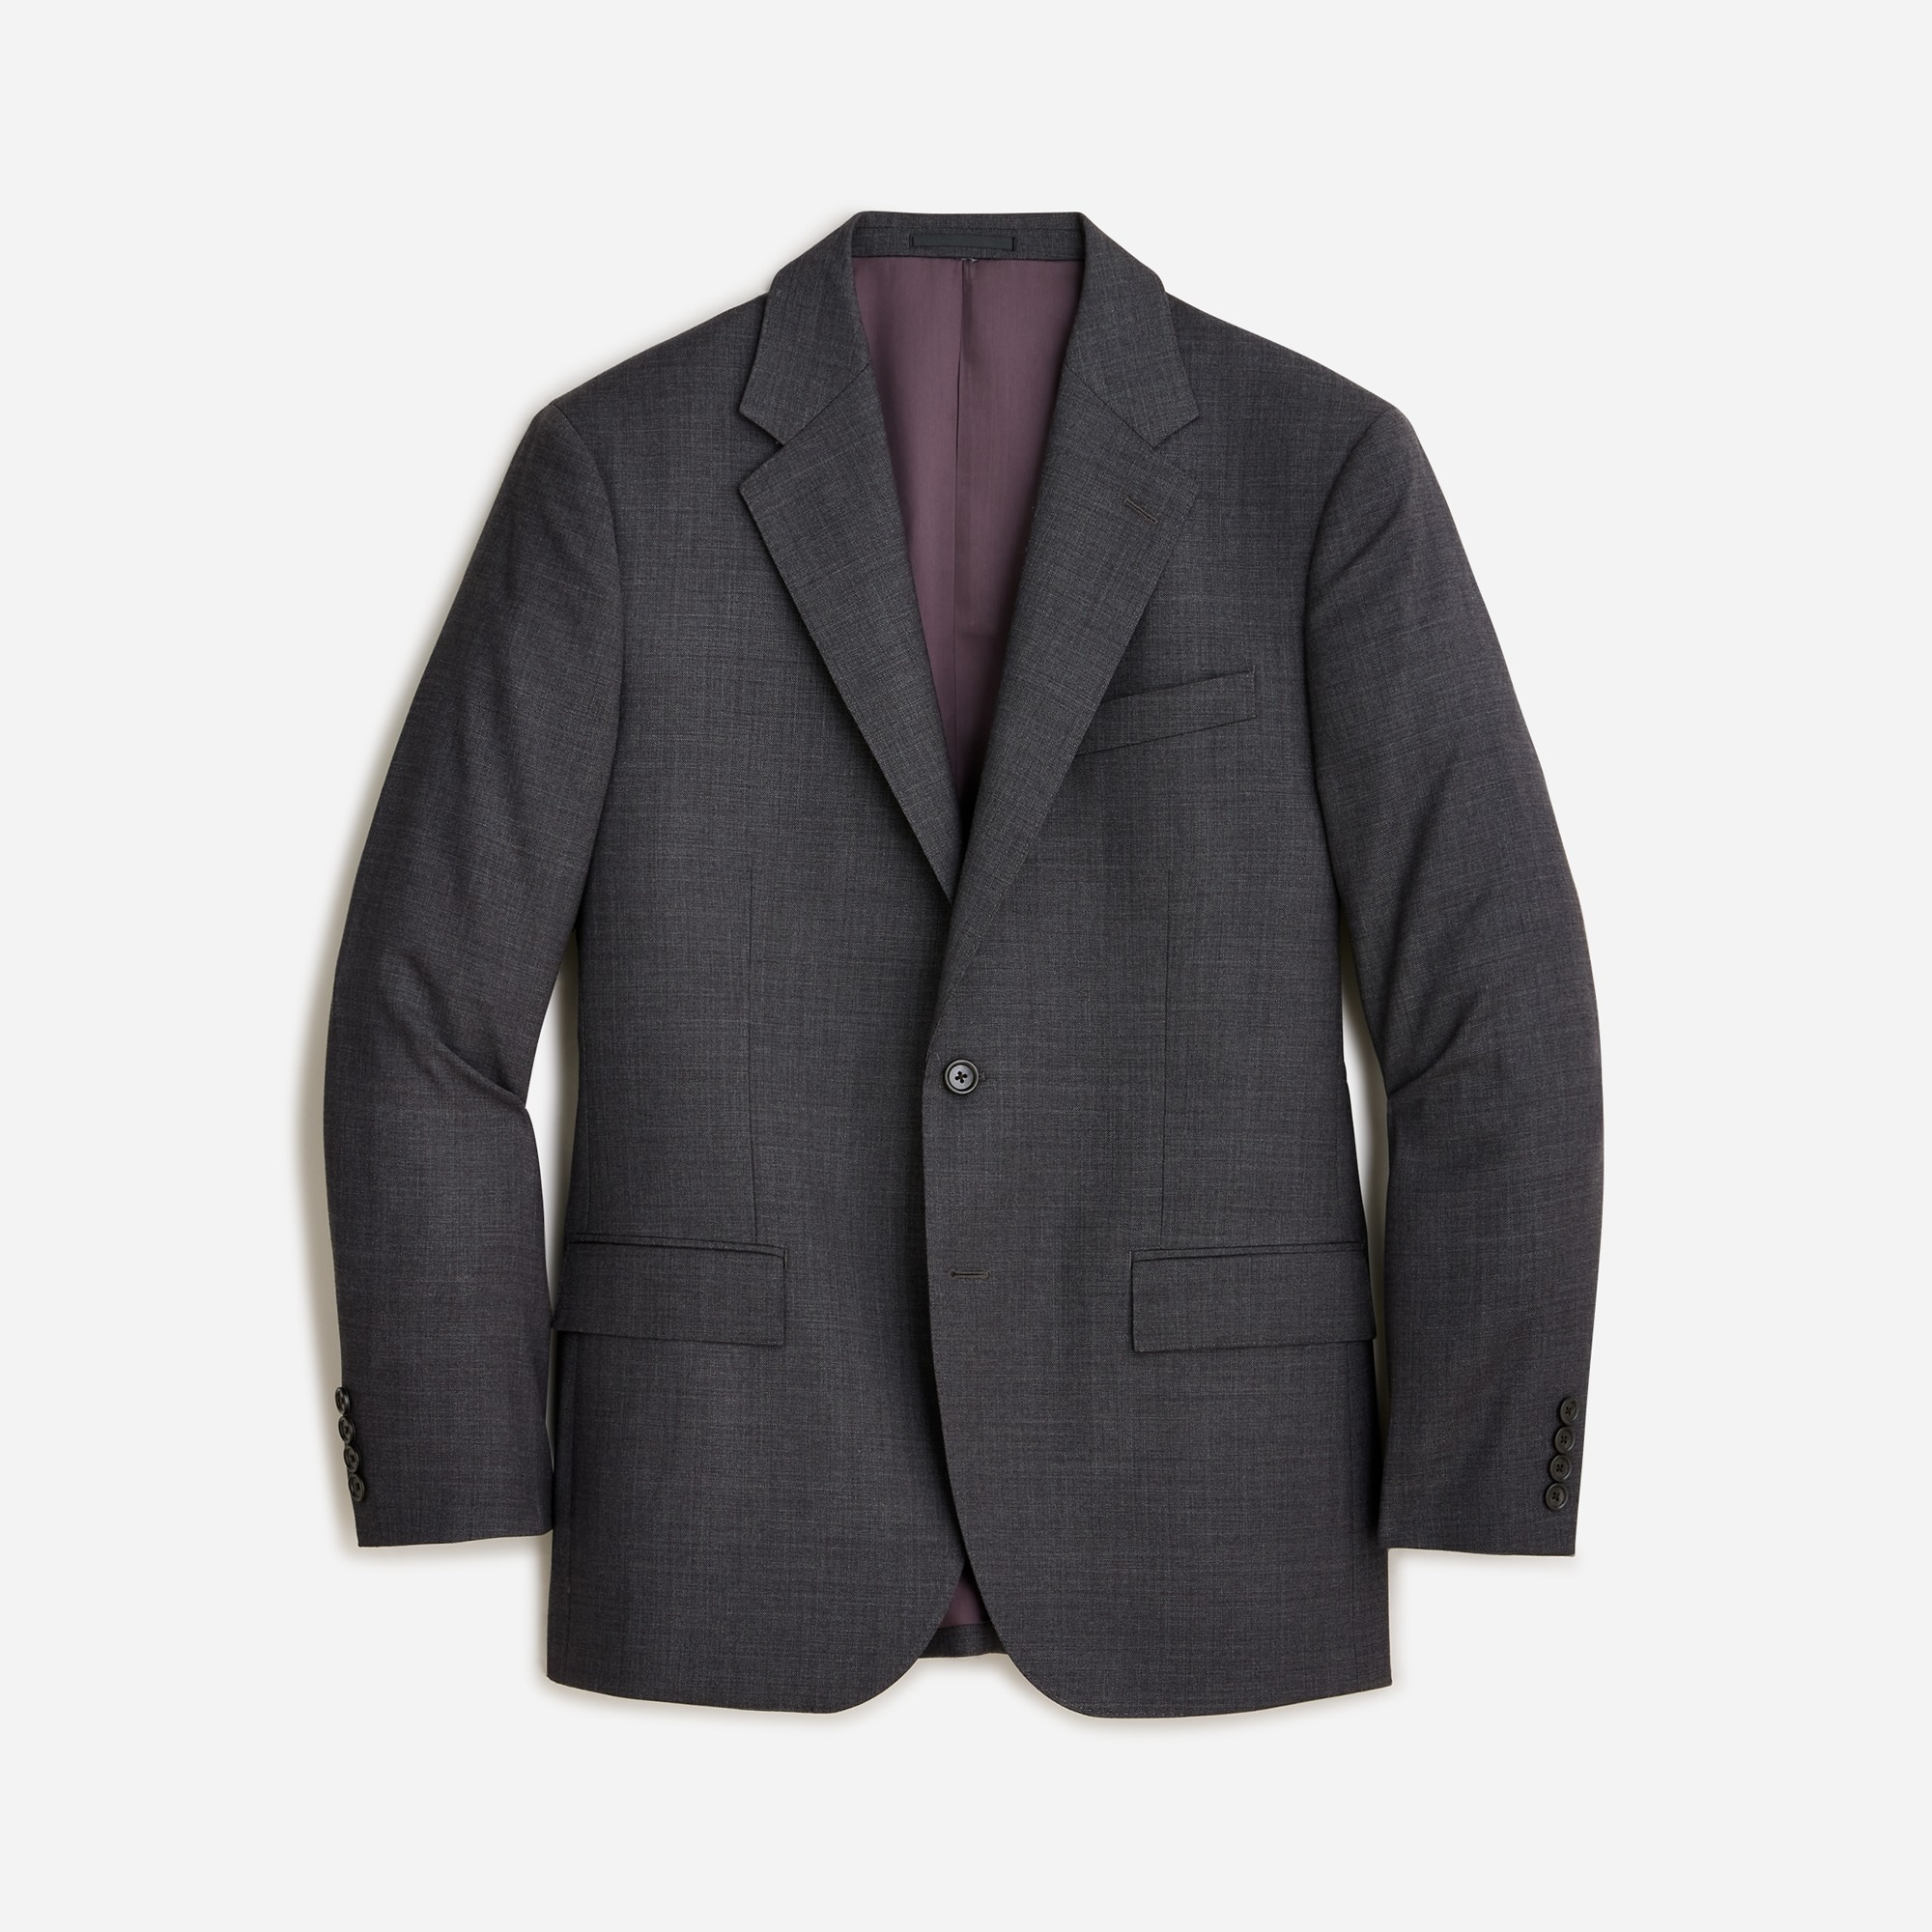 mens Crosby Classic-fit suit jacket in Italian stretch worsted wool blend